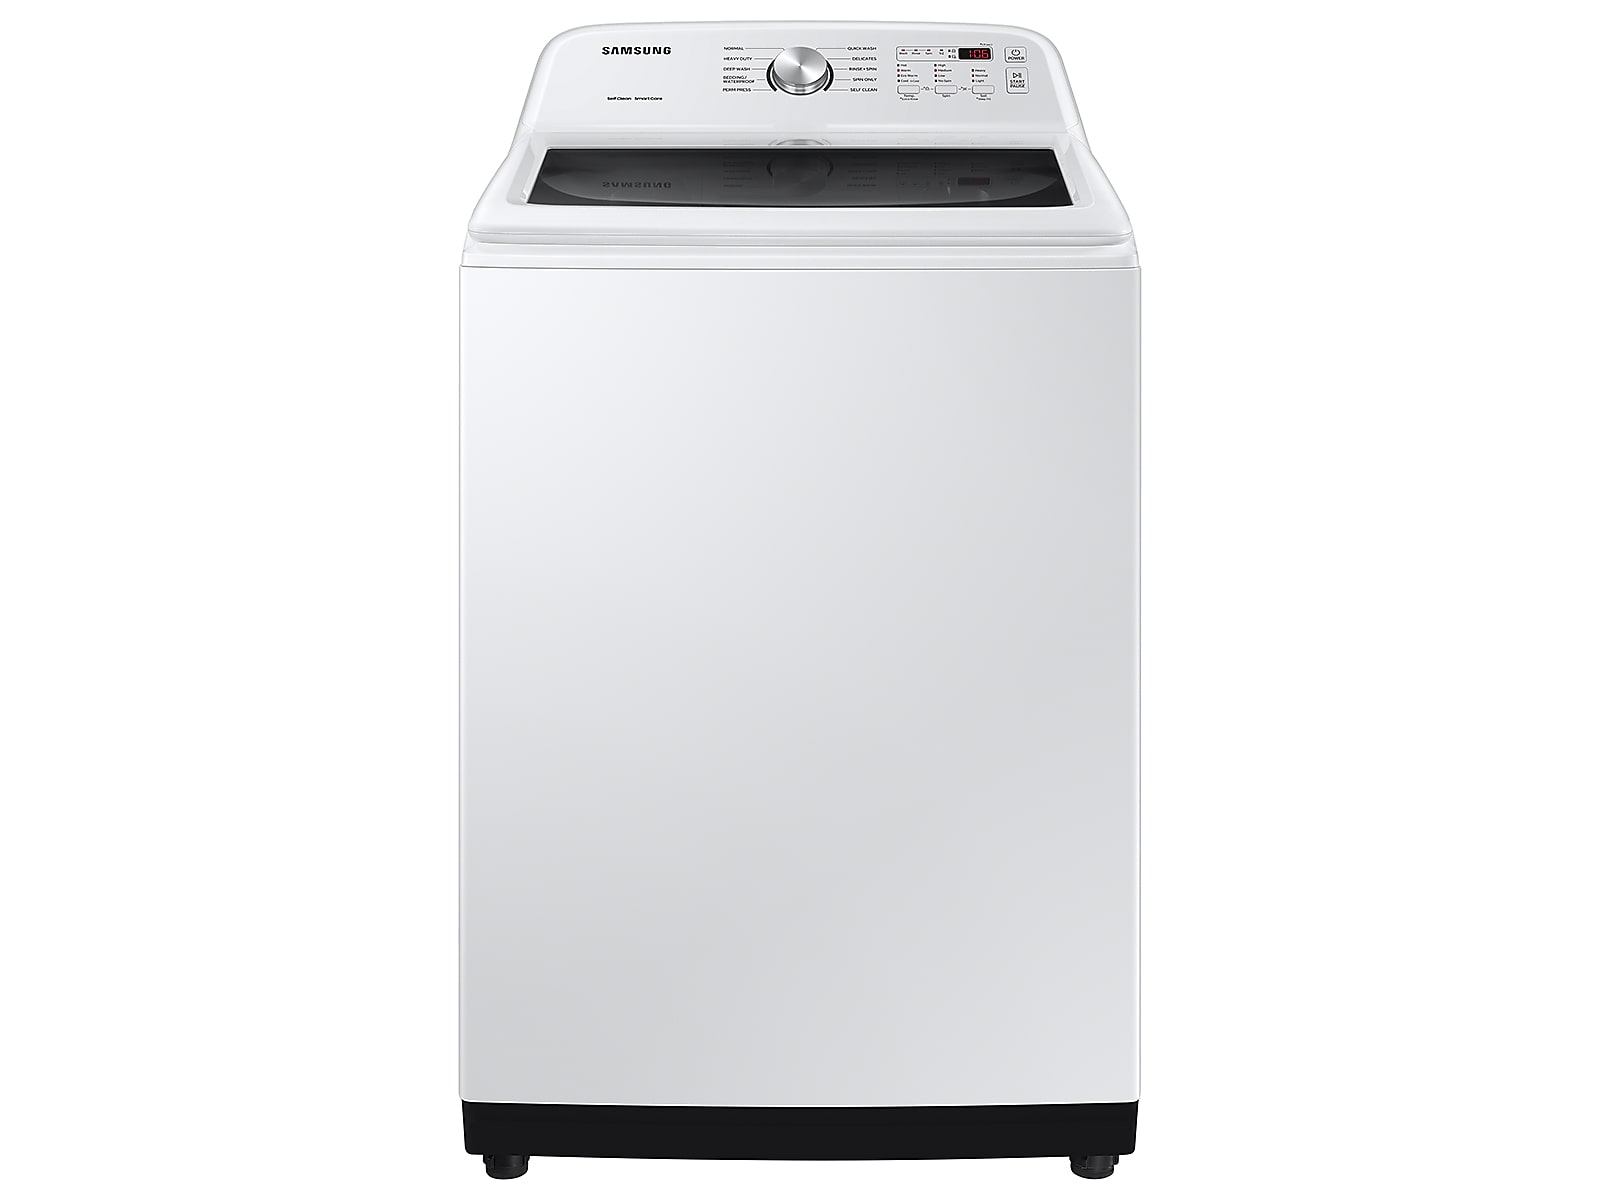 Samsung 5.0 cu. ft. Large Capacity Top Load Washer with Deep Fill and EZ Access Tub in White(WA50B5100AW/US)